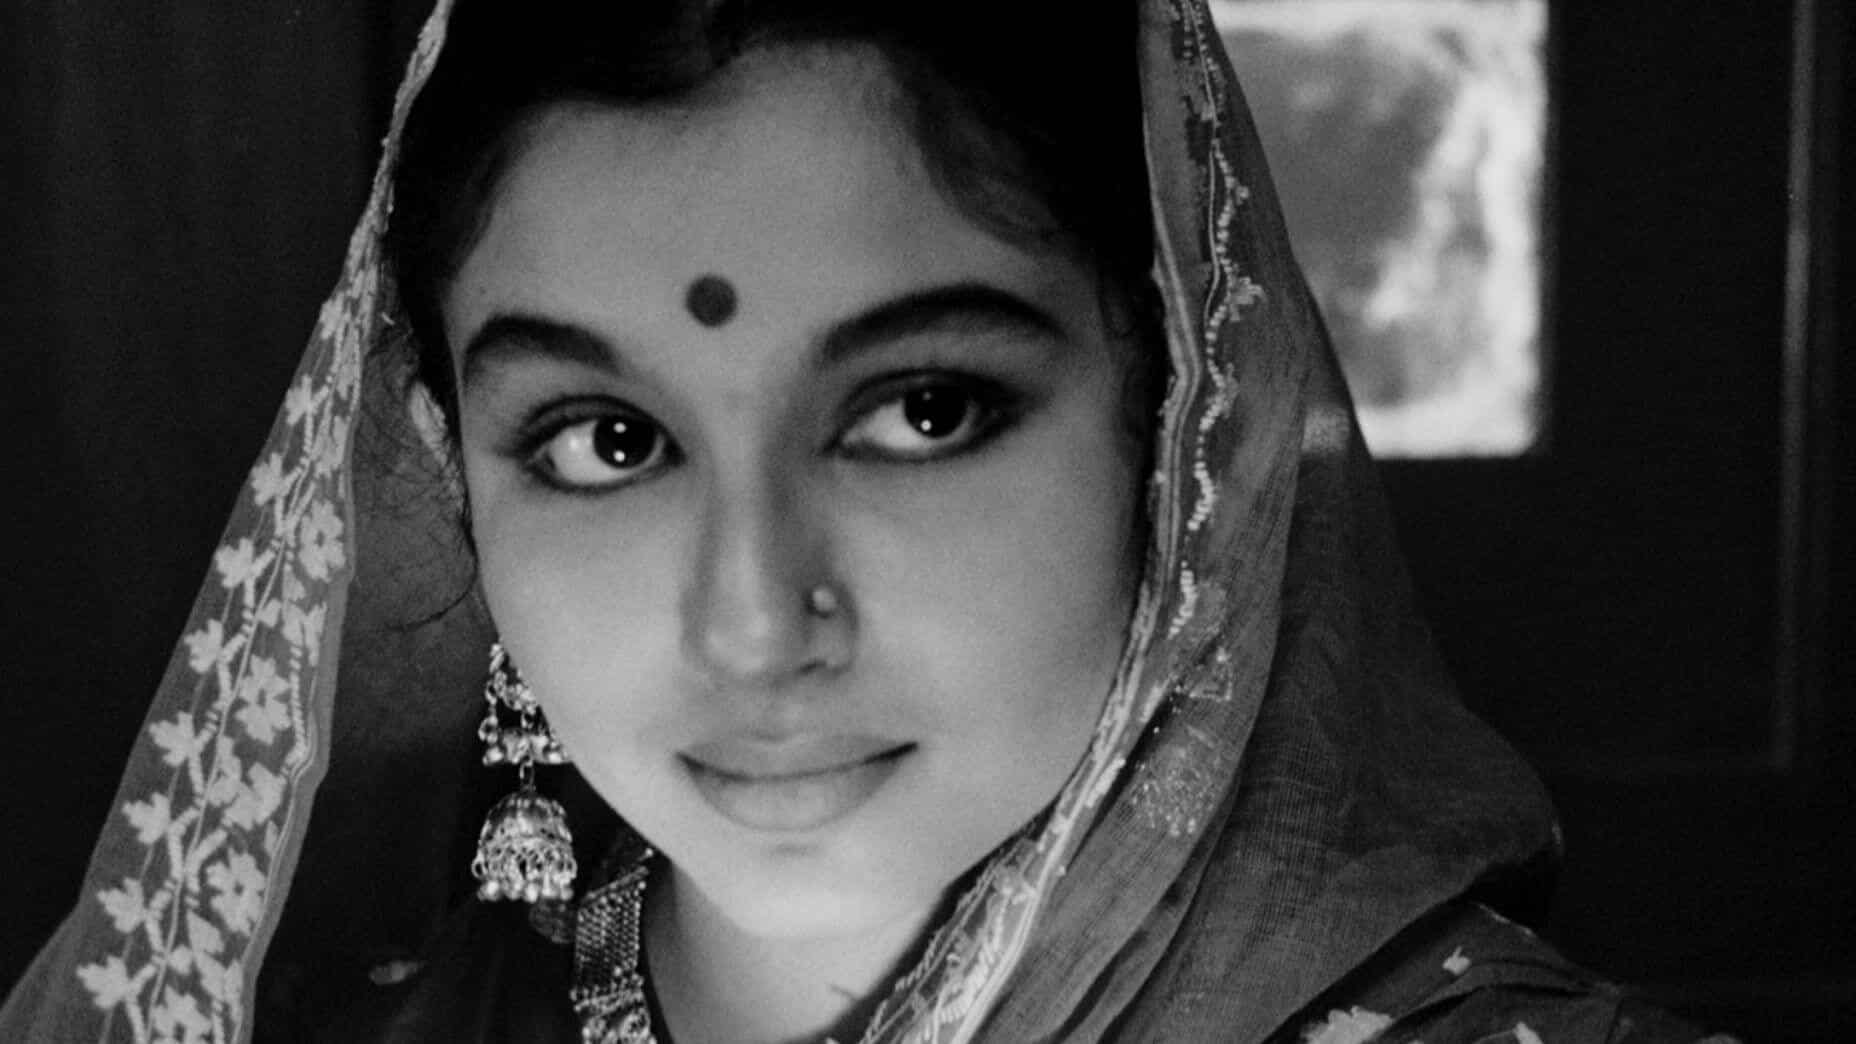 https://www.mobilemasala.com/movies/Will-Sharmila-Tagore-be-seen-in-yet-another-Bengali-film-i275221